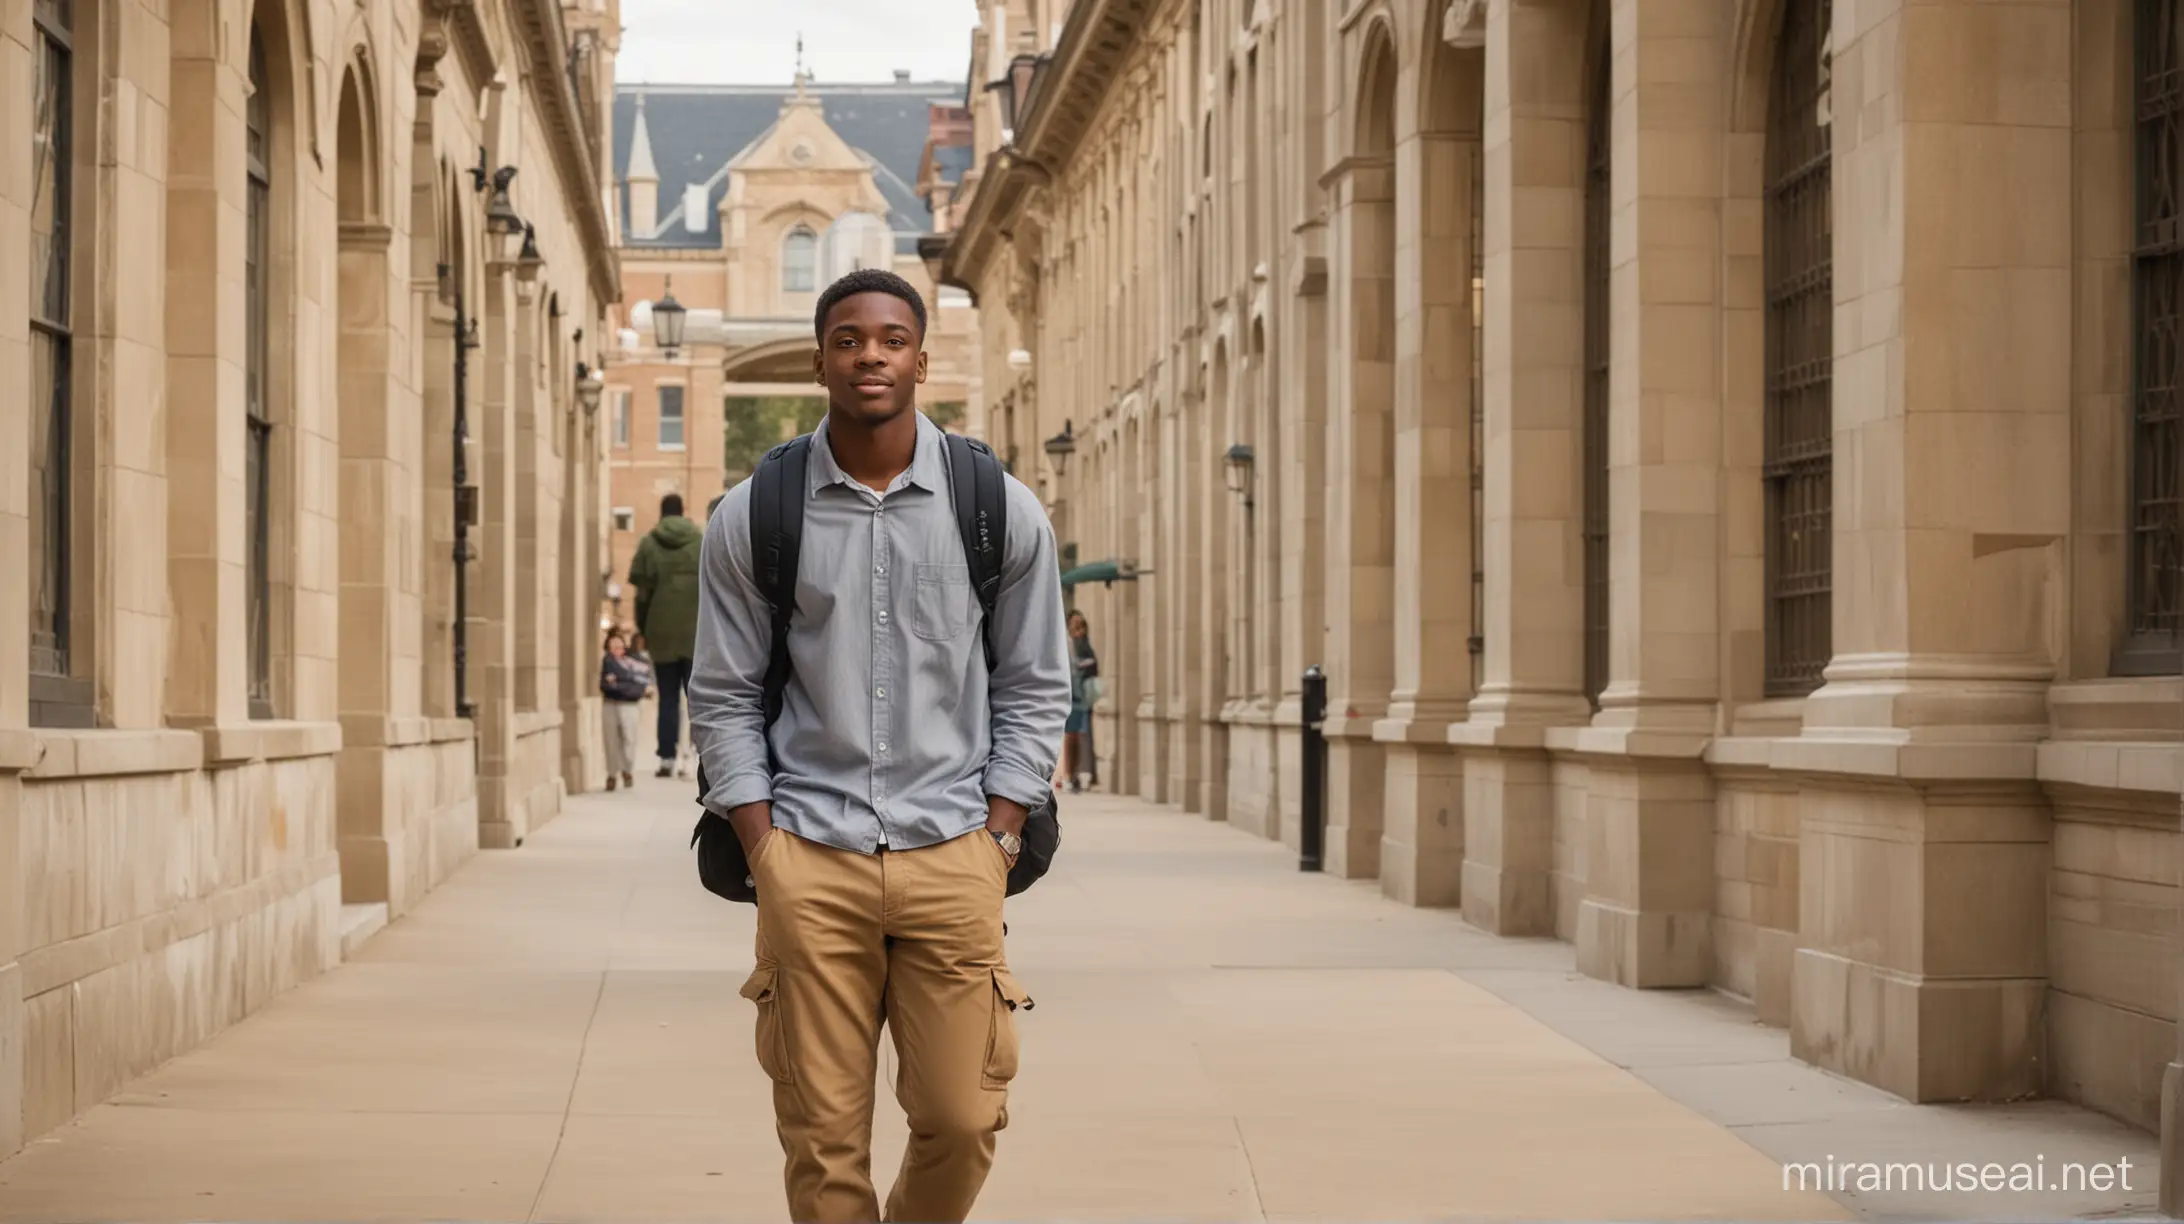 In the vibrant ambiance outside the university building, an African American male student strides purposefully, his backpack slung comfortably over his shoulders. With determination in his step and ambition in his gaze, he approaches the familiar facade of the institution that has become his second home.

Dressed in casual yet neat attire, he exudes confidence and readiness for the day's academic endeavors. The weight of his backpack is a familiar comfort, containing the tools and materials he needs to excel in his studies.

As he crosses the threshold of the university building, a sense of anticipation fills the air. The bustling energy of student life surrounds him as he joins his peers in the pursuit of knowledge and growth.

With each step, the African American male student embraces the opportunity for learning and self-improvement that awaits him within the halls of academia. With determination in his heart and a thirst for knowledge in his soul, he embarks on another day of academic exploration, ready to seize the opportunities that lie ahead.